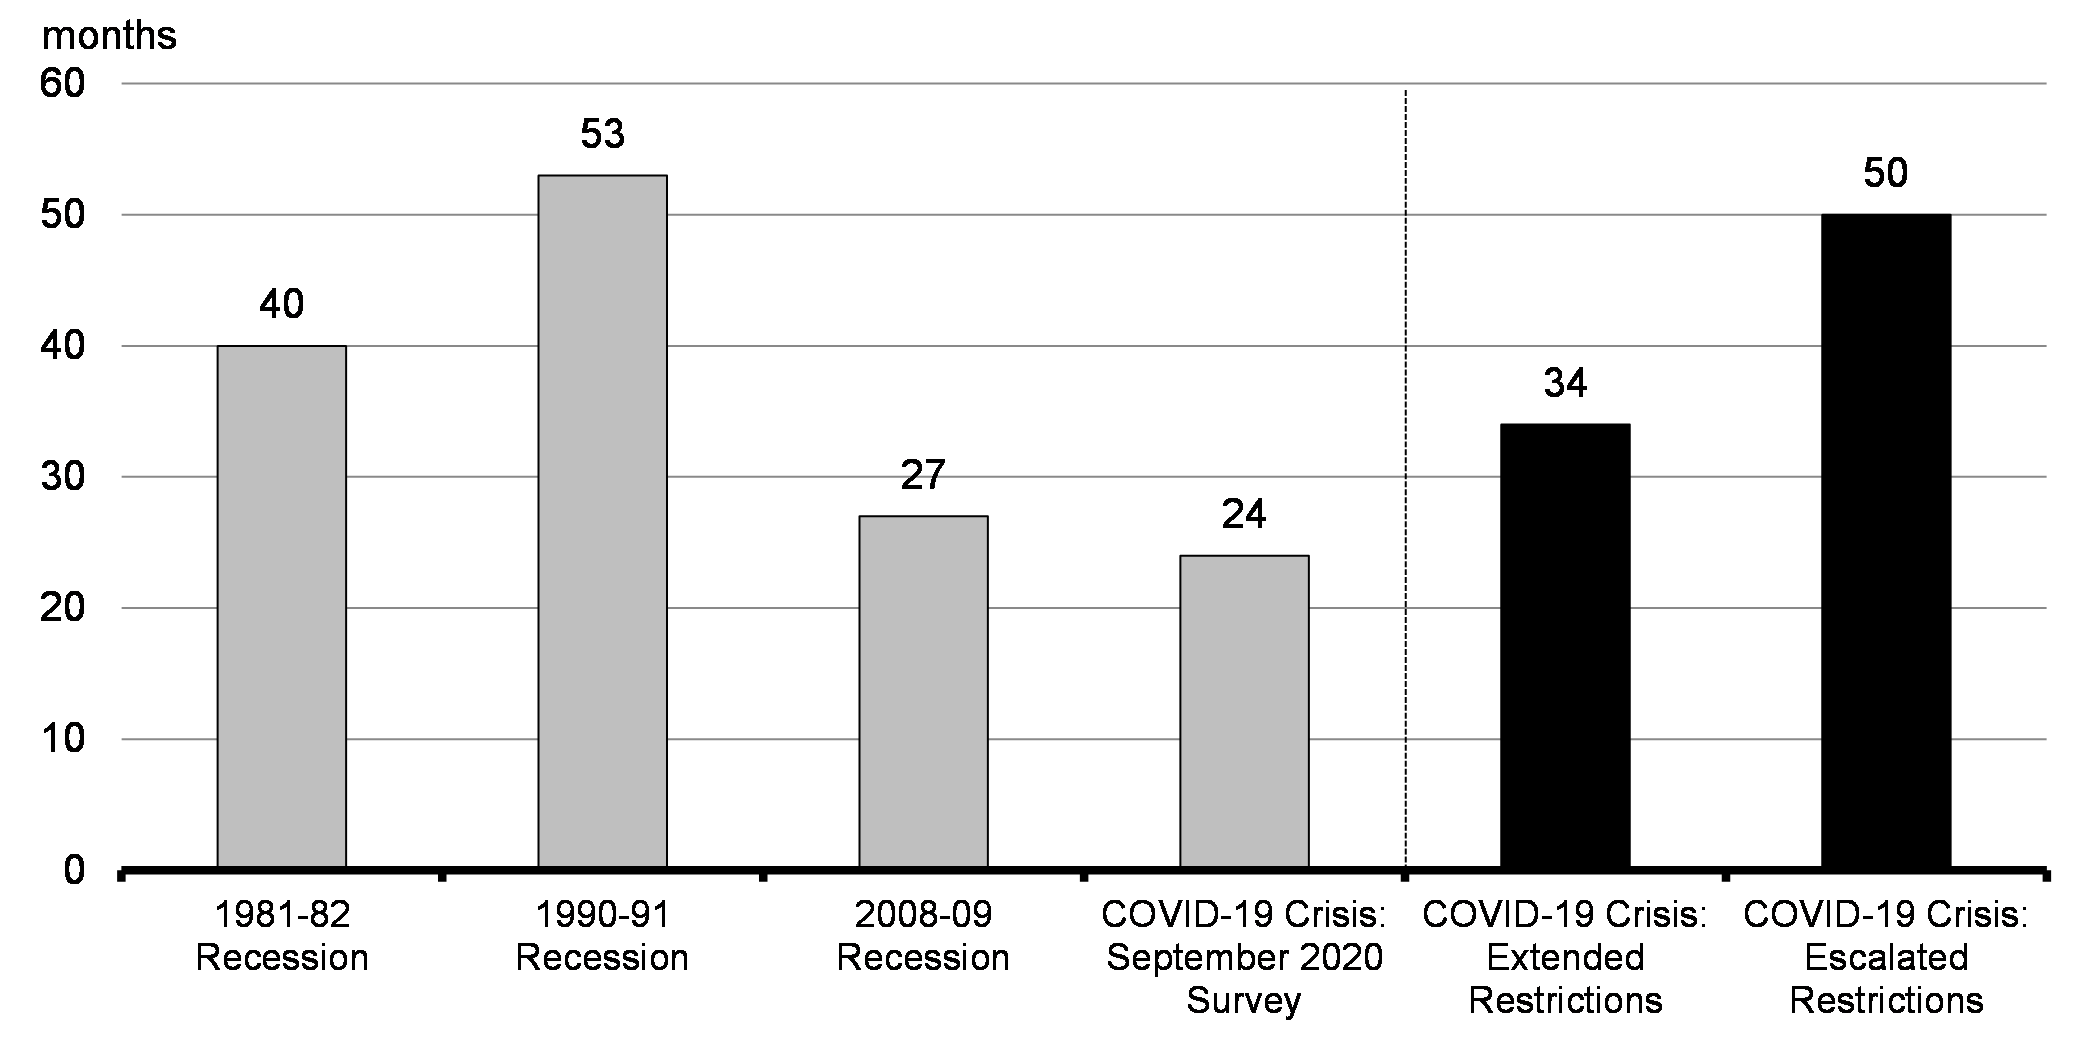 Chart 3.10: Number of Months to Reach Employment Pre-Recession Peak